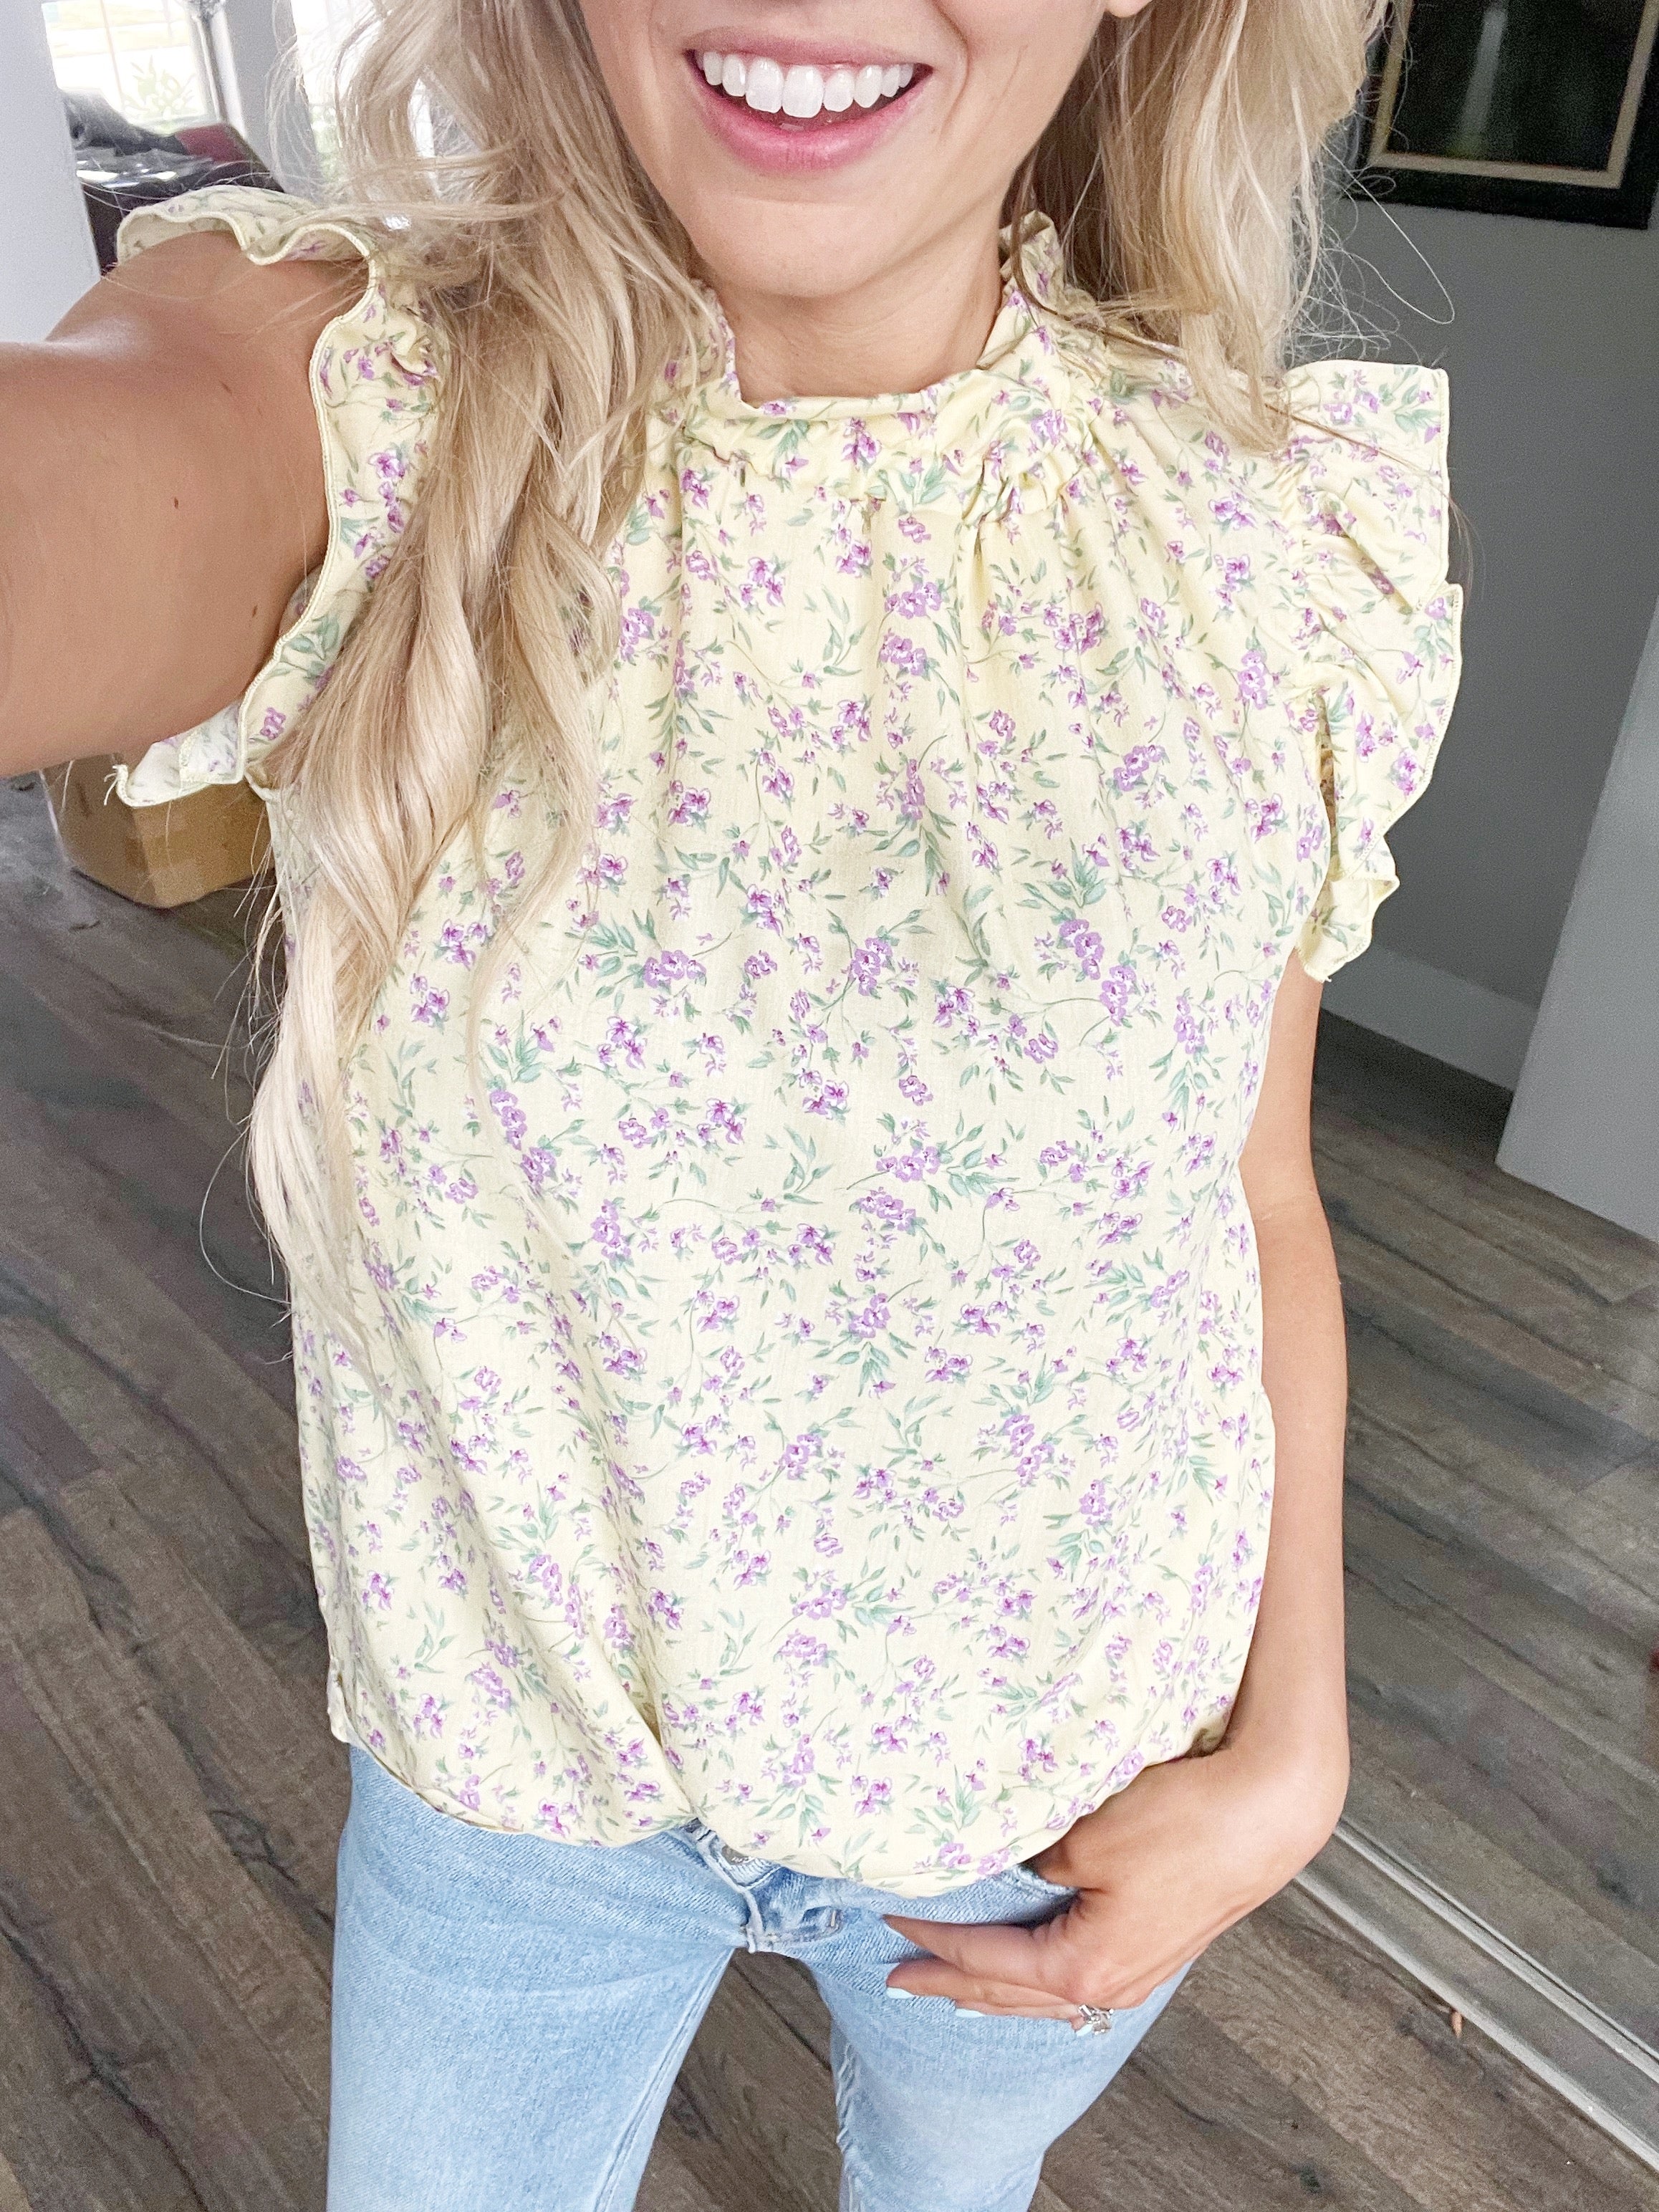 tapperhed nåde Insister Yearbook Picture Ruffle Tank in Soft Yellow and Lavender Floral – Ivory Gem